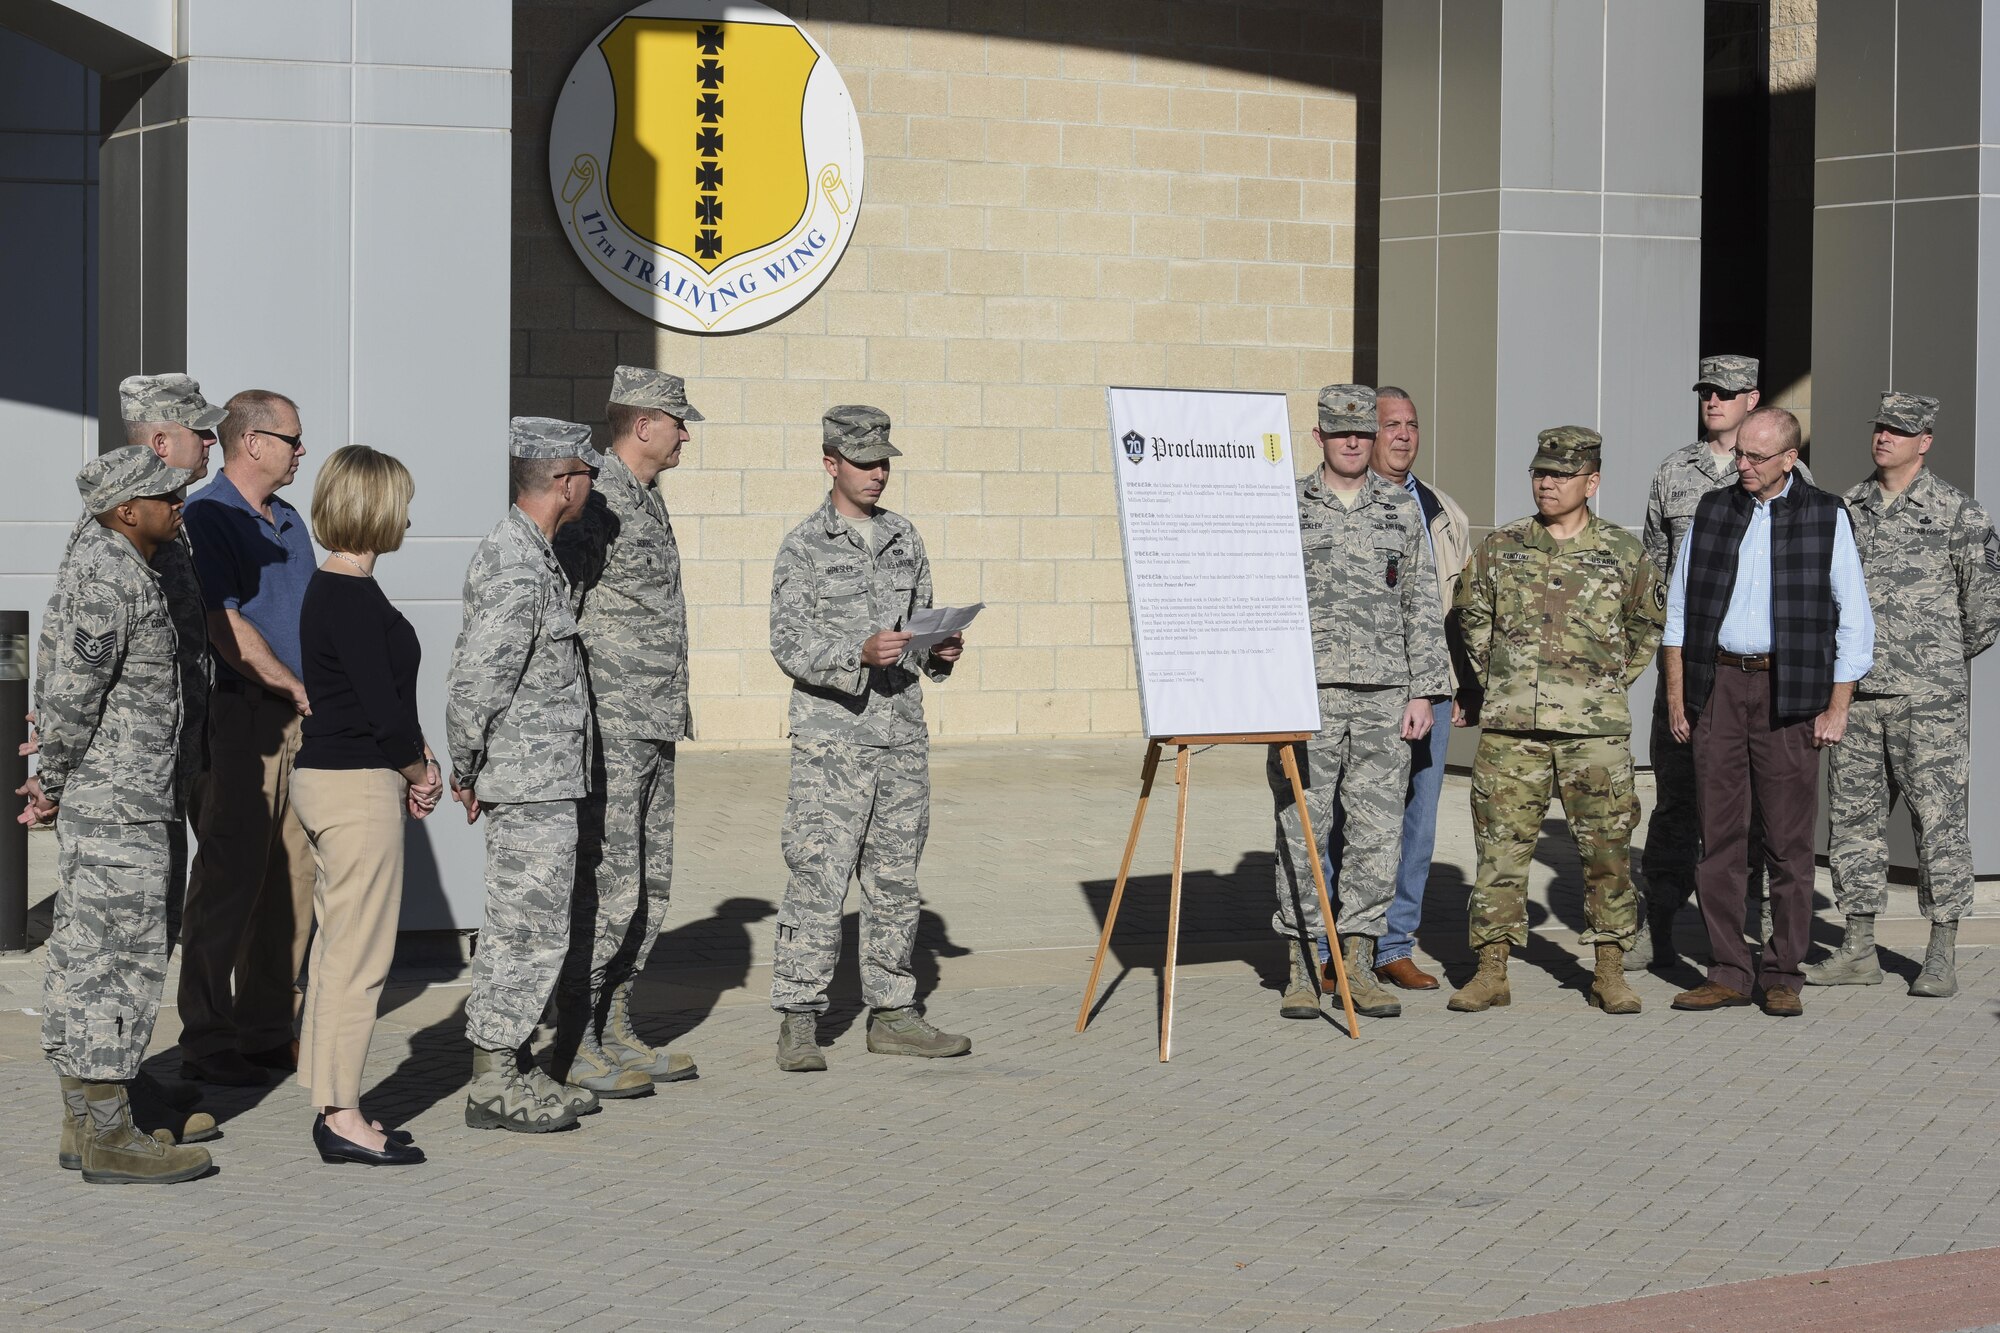 U.S. Air Force Airman Alexander Presley, 17th Civil Engineer Squadron emergency management apprentice, reads the Energy Week proclamation before Col. Jeffrey Sorrell, 17th Training Wing vice commander, signs it in front of the Norma Brown building on Goodfellow Air Force Base, Texas, Oct. 17, 2017. The week of Oct. 17 through 24 was recognized as Energy Week, bringing awareness to the need of energy conservation. (U.S. Air Force photo by Airman 1st Class Zachary Chapman/Released)